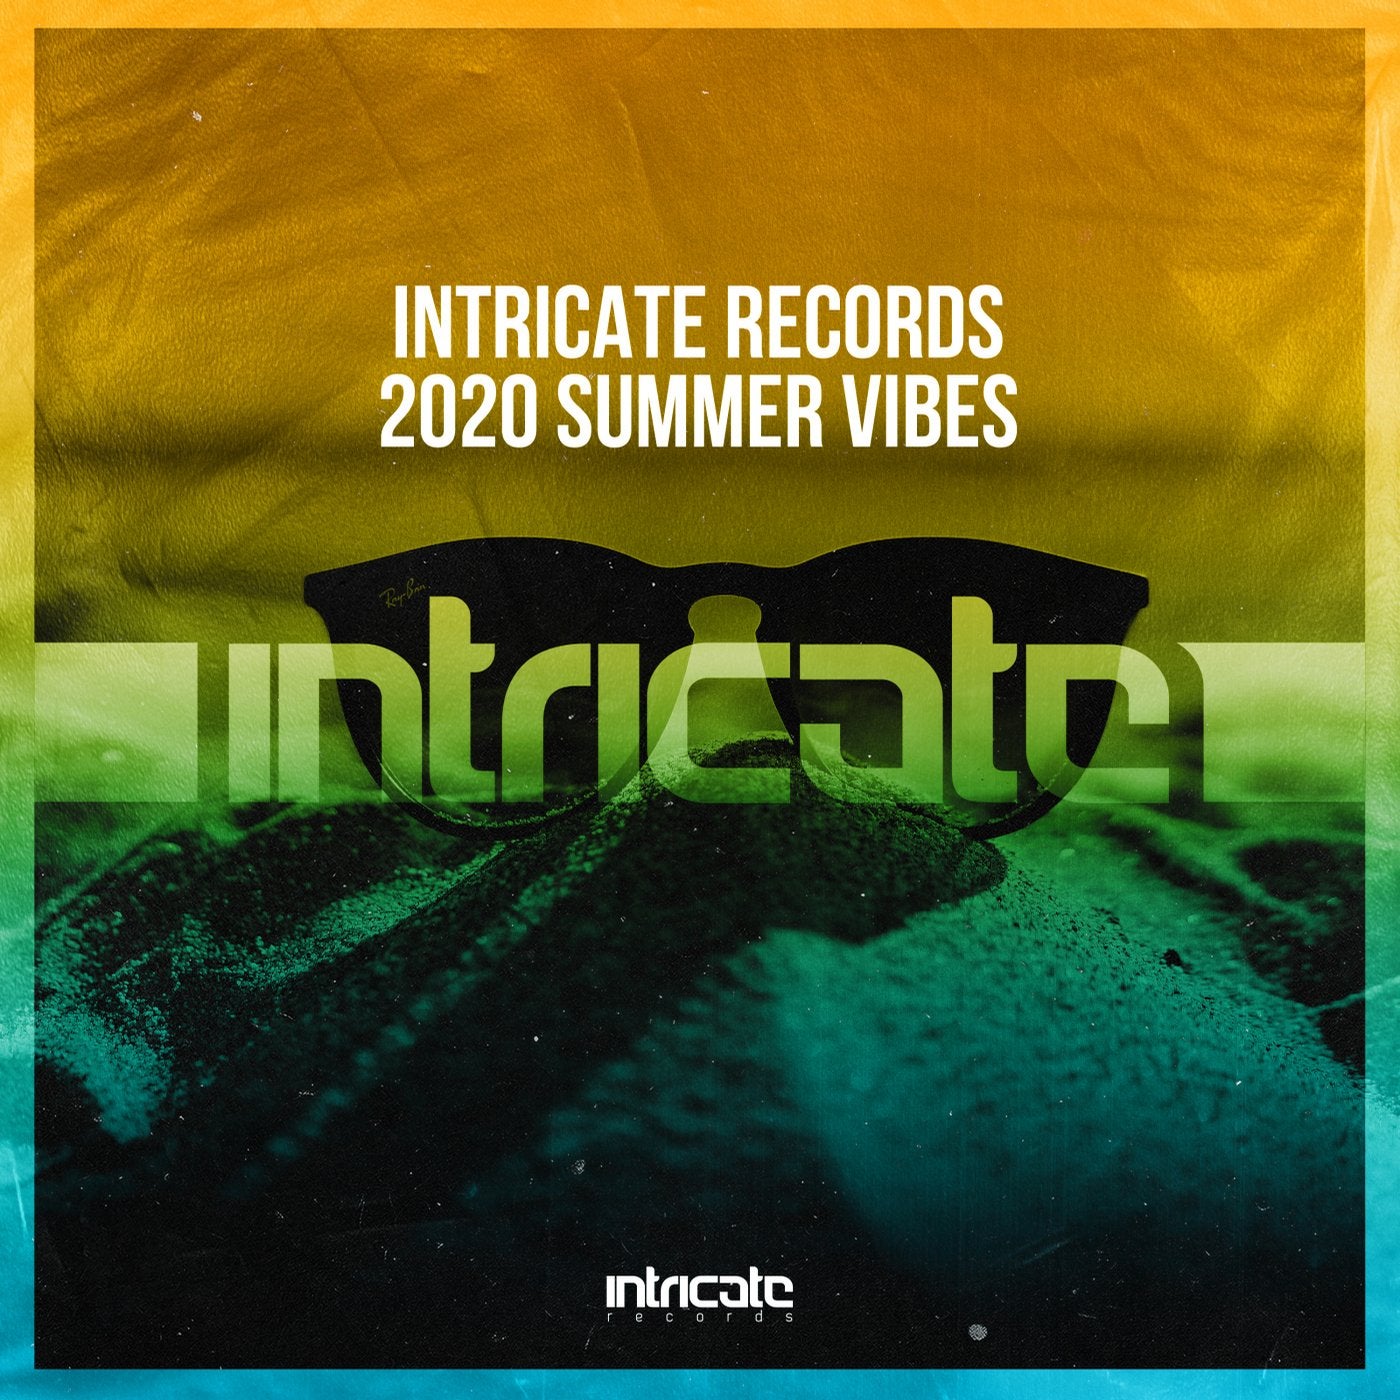 Intricate Records 2020 Summer Vibes